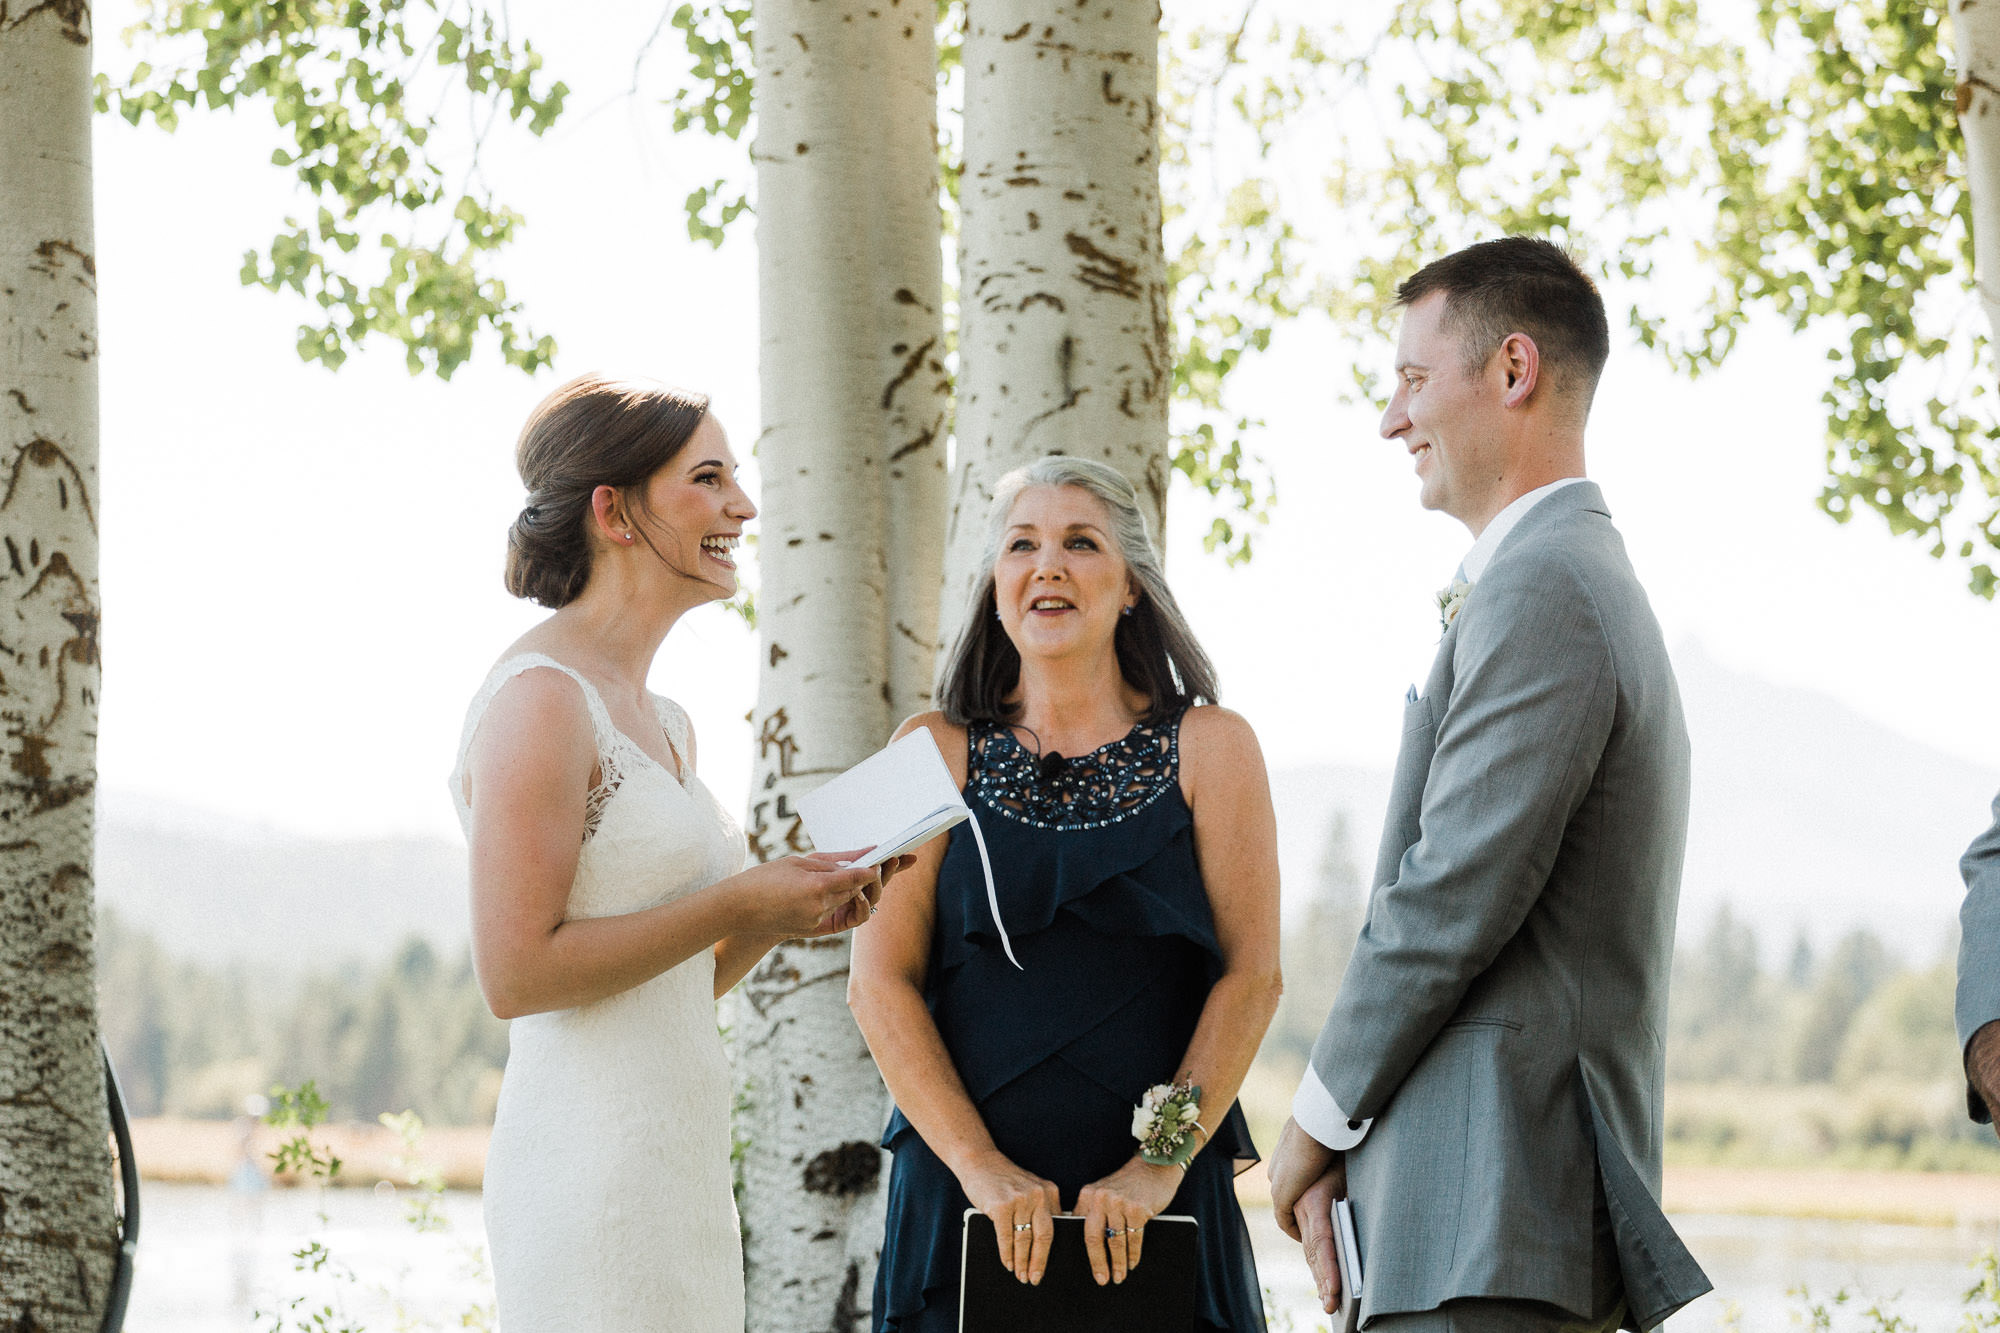 Bride reads vows during wedding ceremony at Black Butte Ranch in Oregon